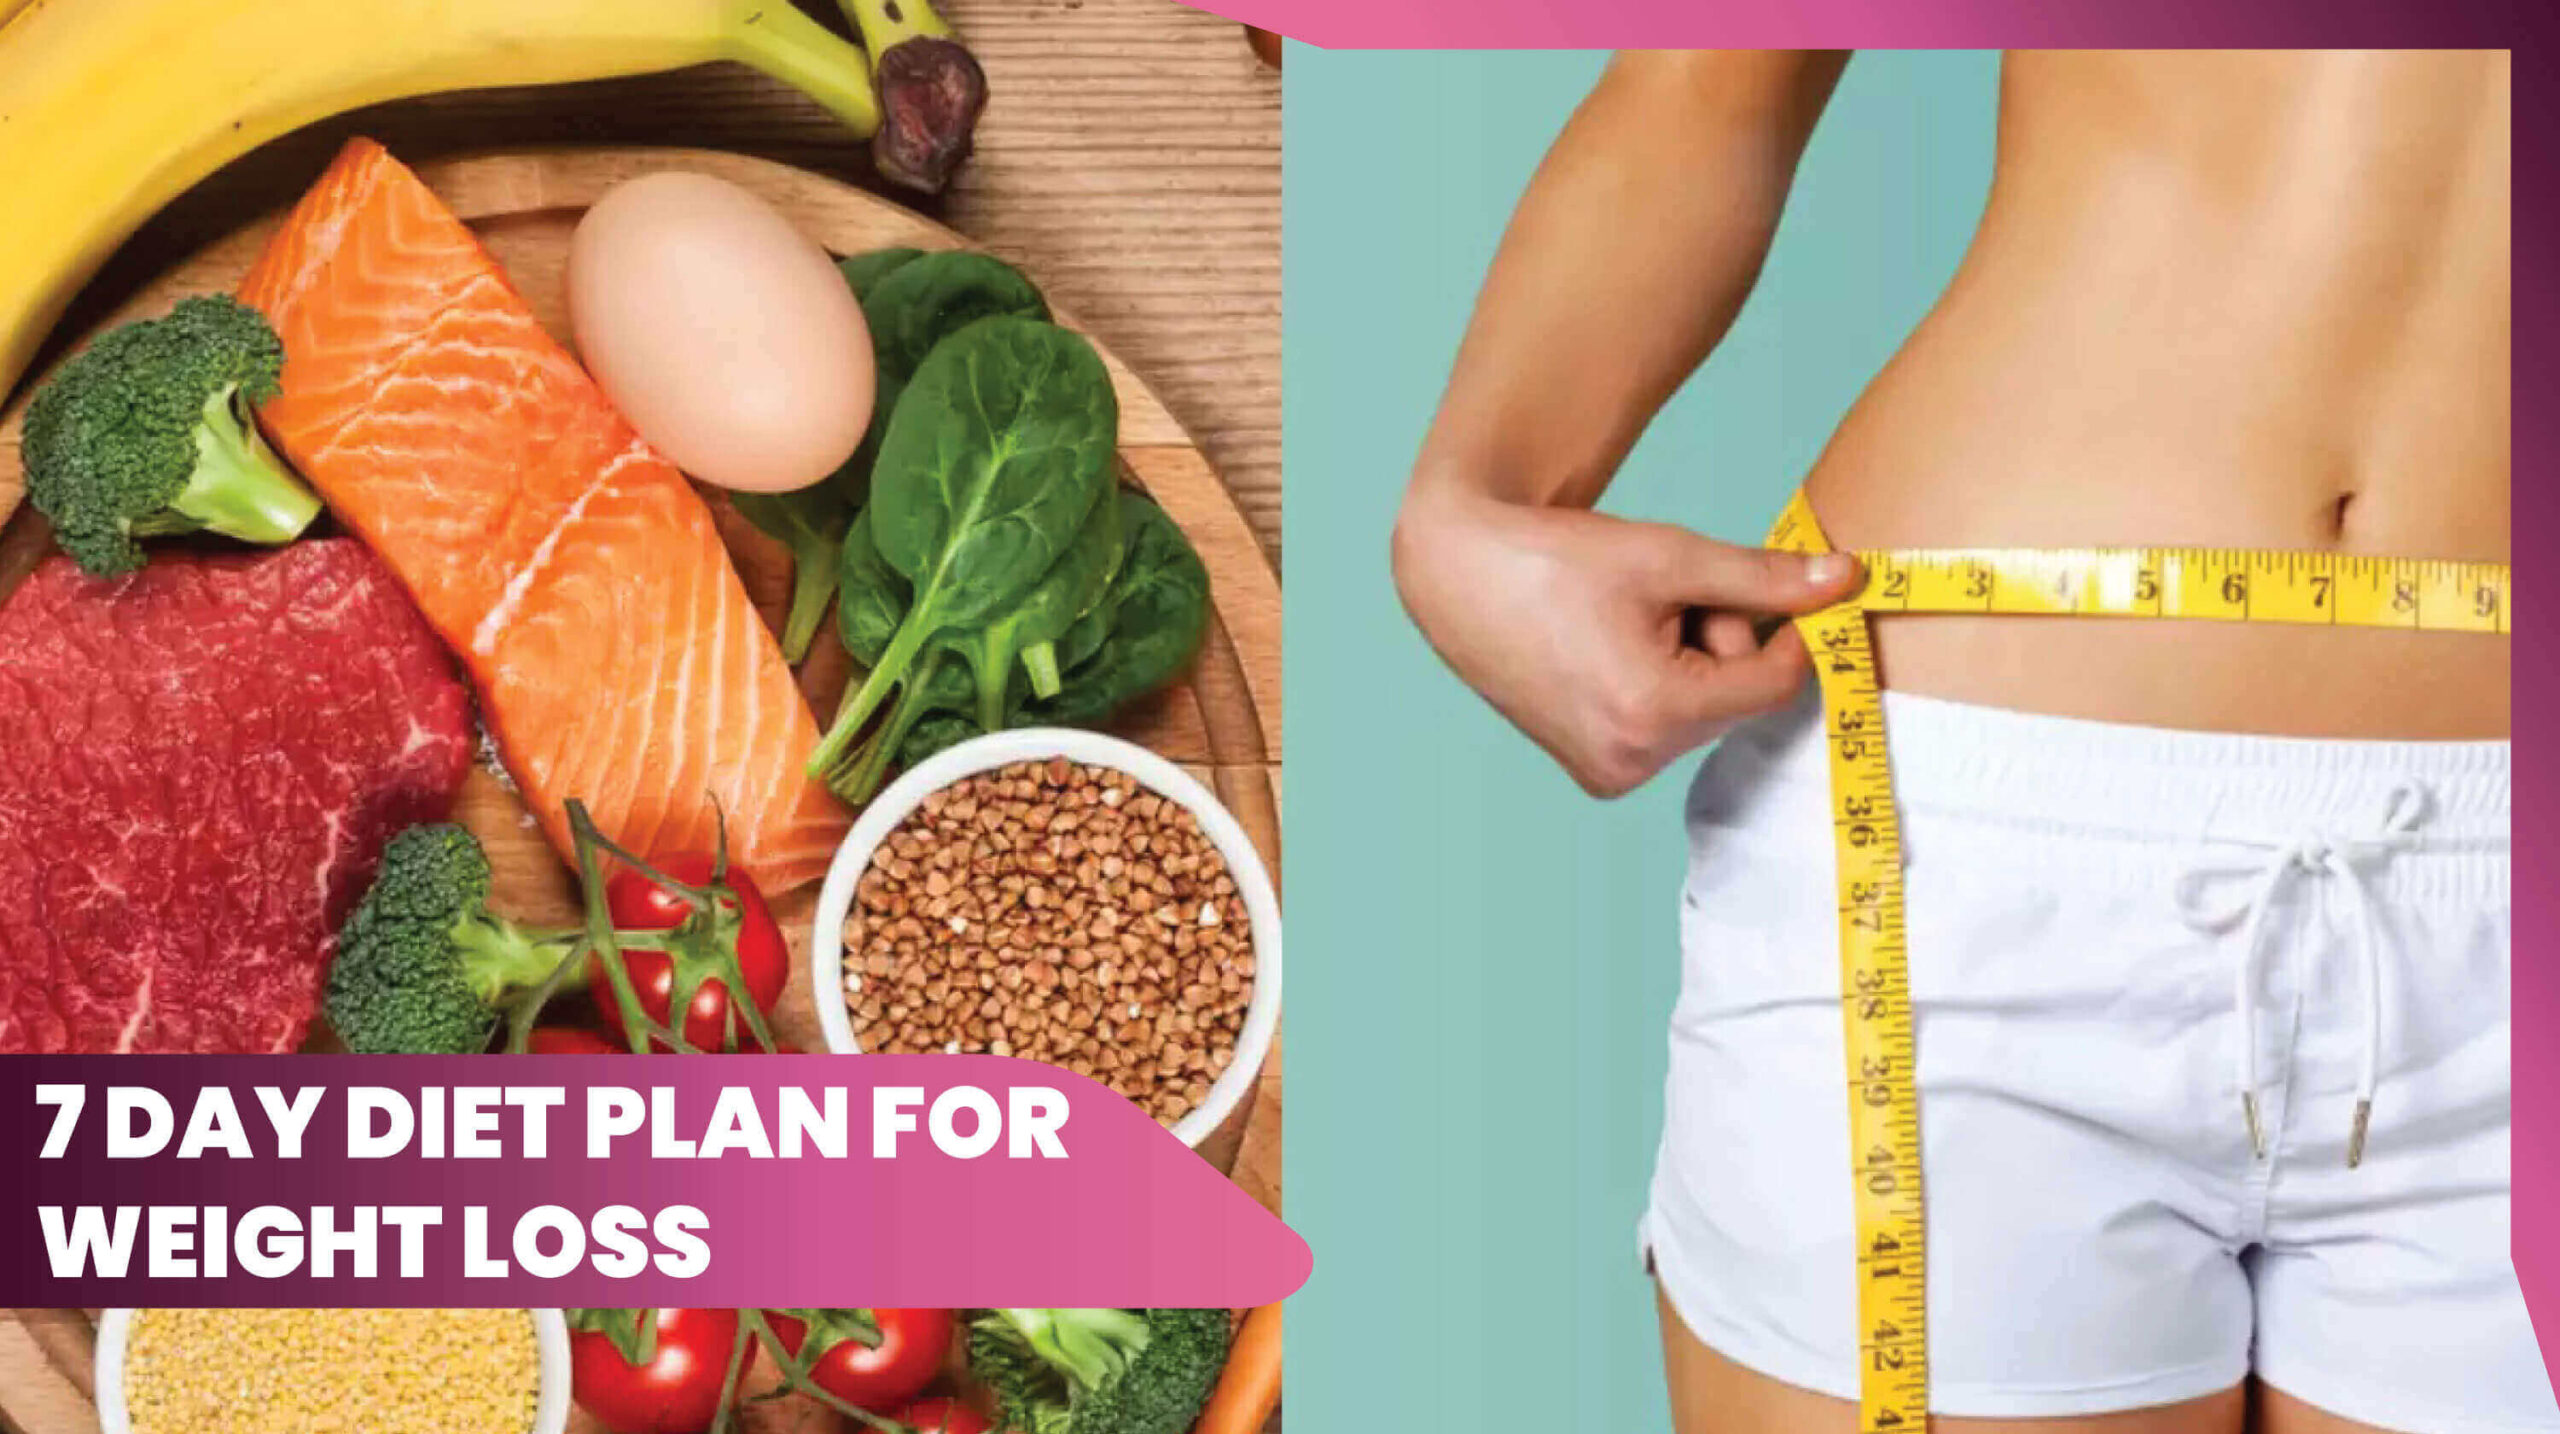 117 day diet plan for weight loss for vegetarian and non-vegetarian people